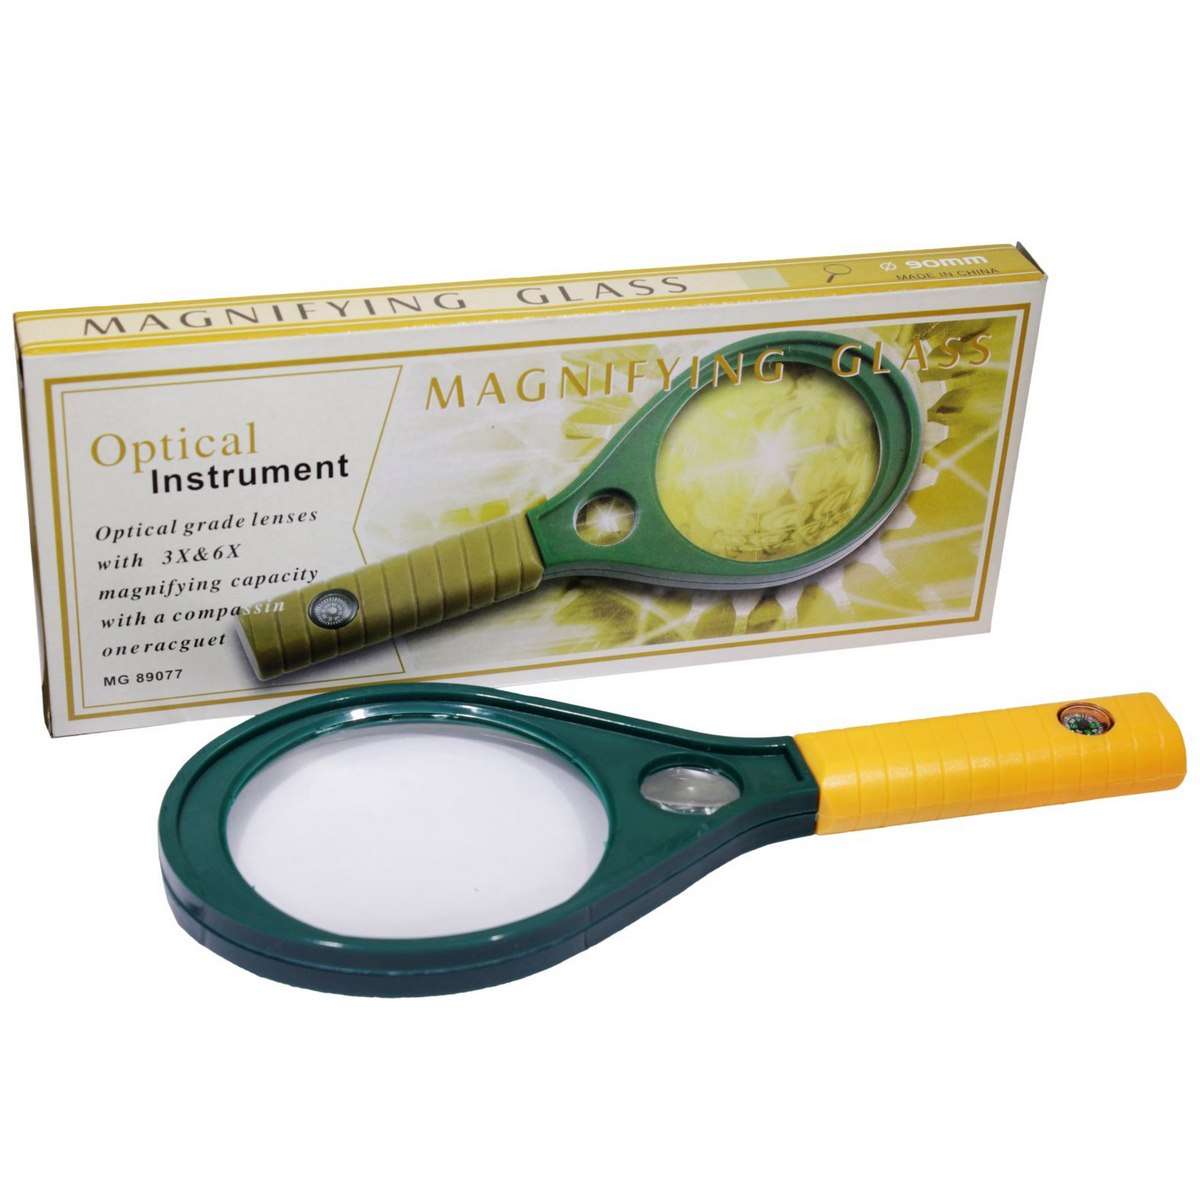 Magnifying Glass 75mm - For Office Use, Students, Professionals, Personal Use, Corporate Gifting, Return Gift JAMG89076